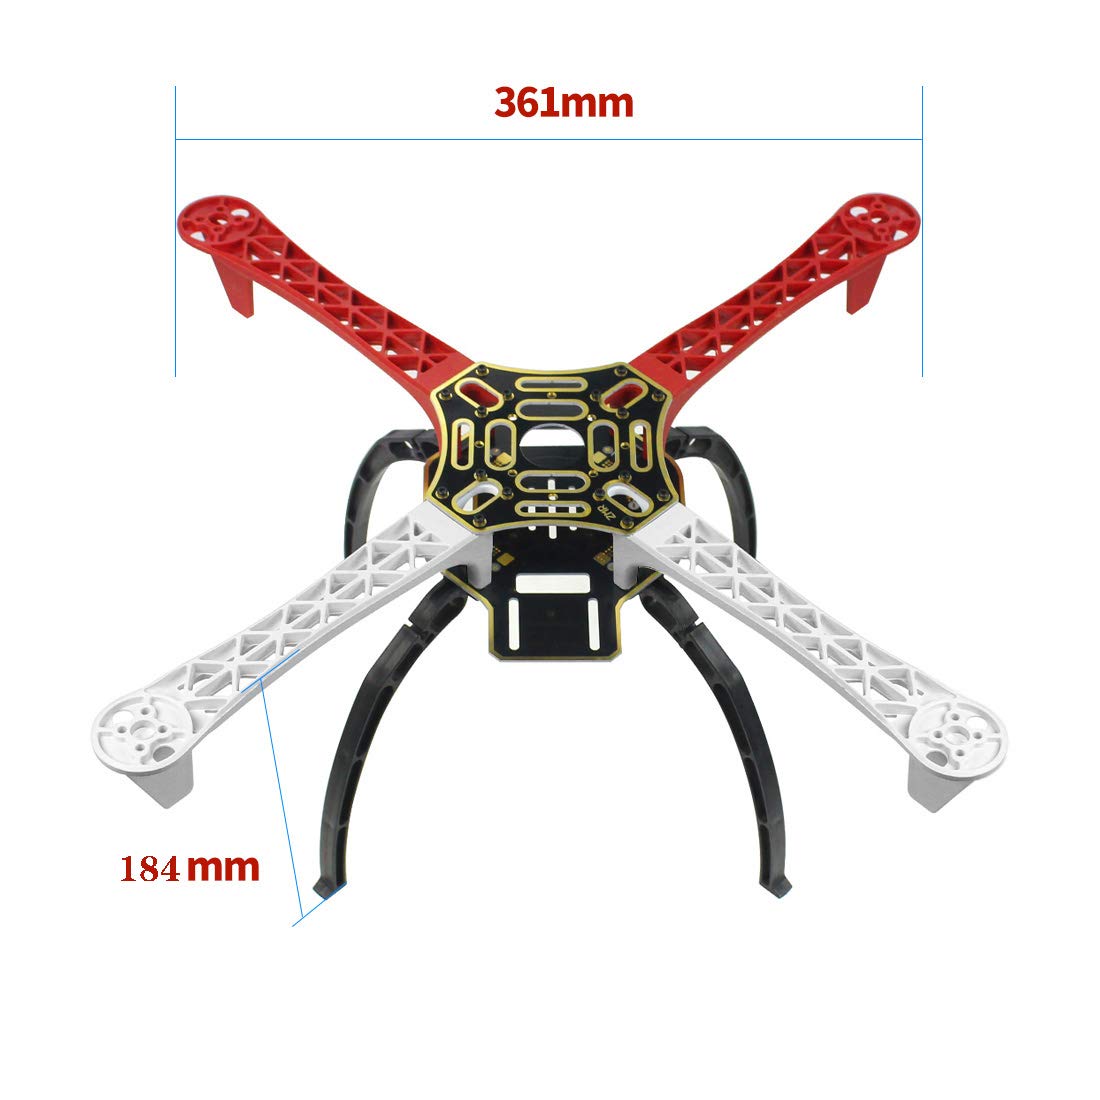 QWinOut DIY 2.4G 8CH KK V2.3 /APM2.8 F450 Frame RC Quadcopter 4-Axle UFO Unassembly Kit RTF/ARF Drone (Airframe with Landing Skid)